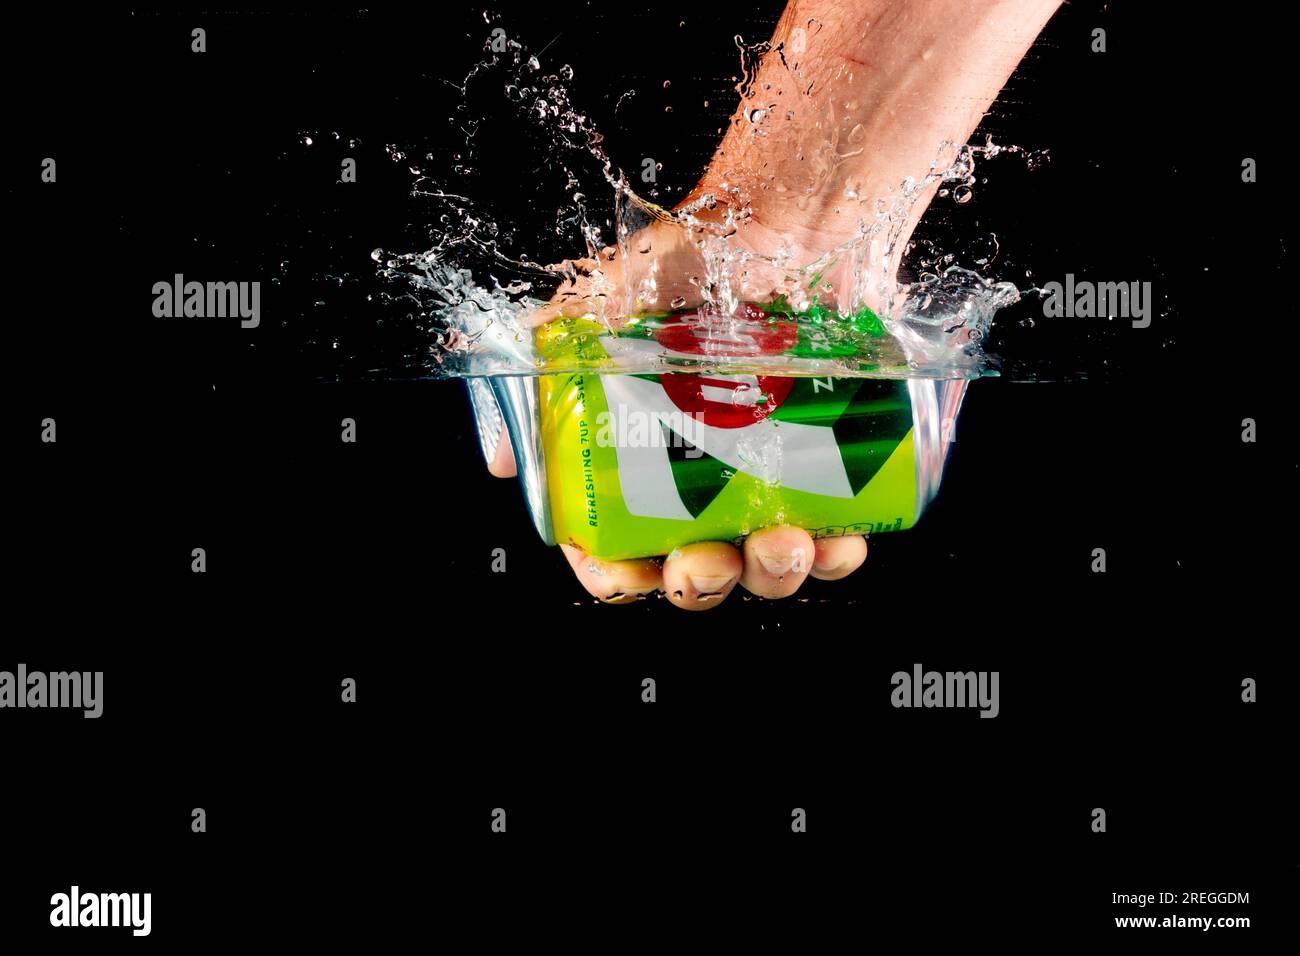 London, United Kingdom, 24th July 2023: A Can of 7up held in a hand splashing into water against a black background Stock Photo